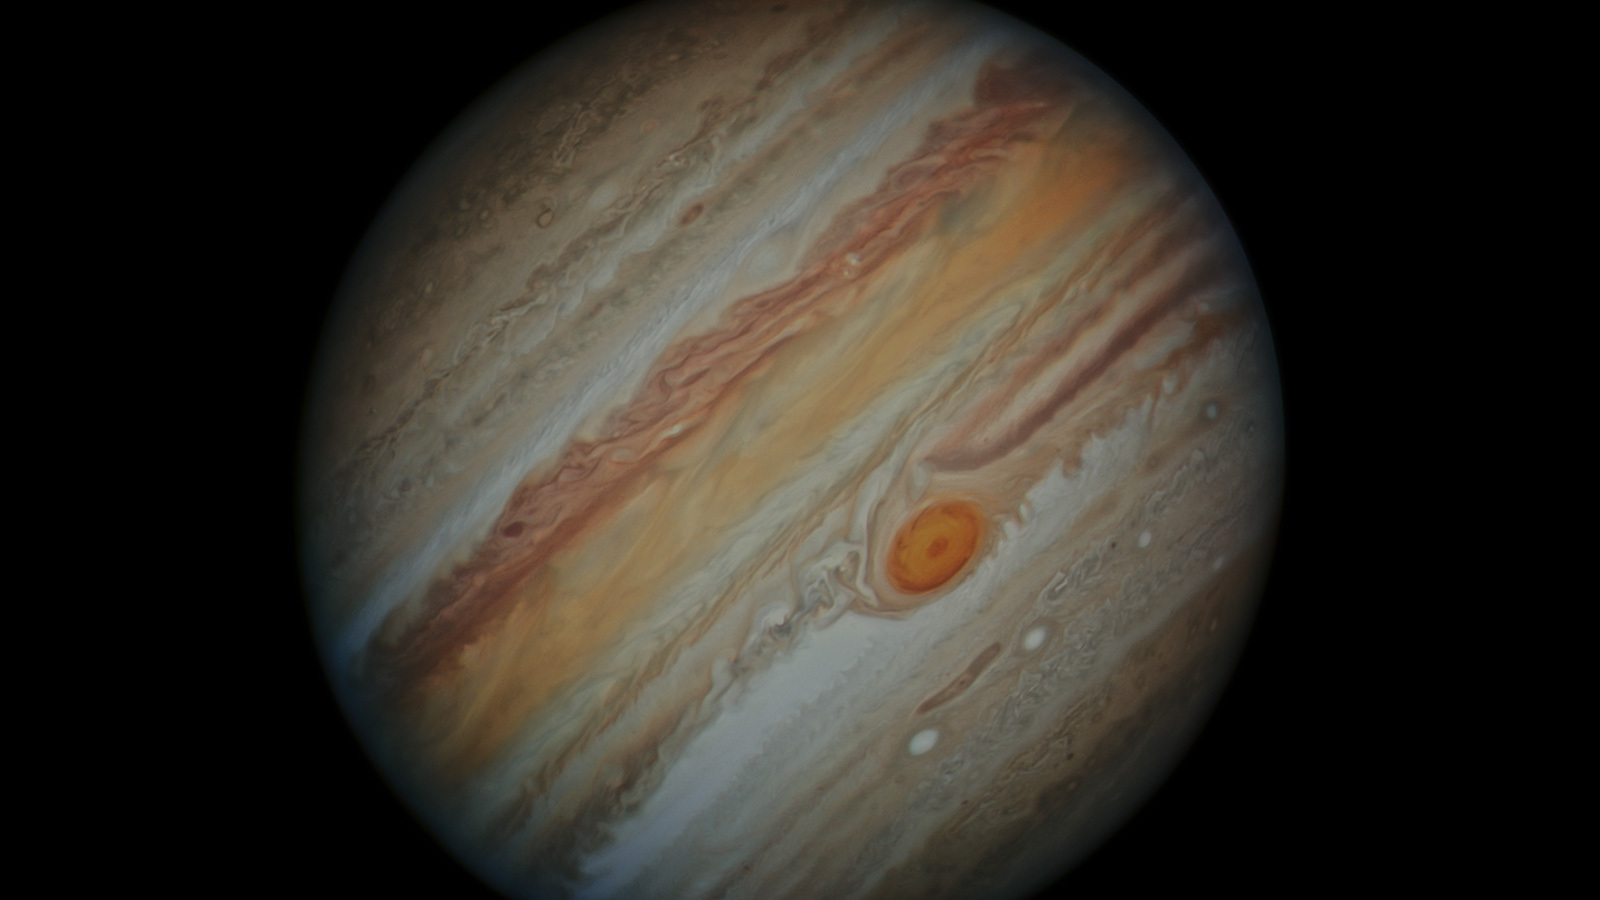 full-disc view of colorful, banded clouds and red storm on jupiter